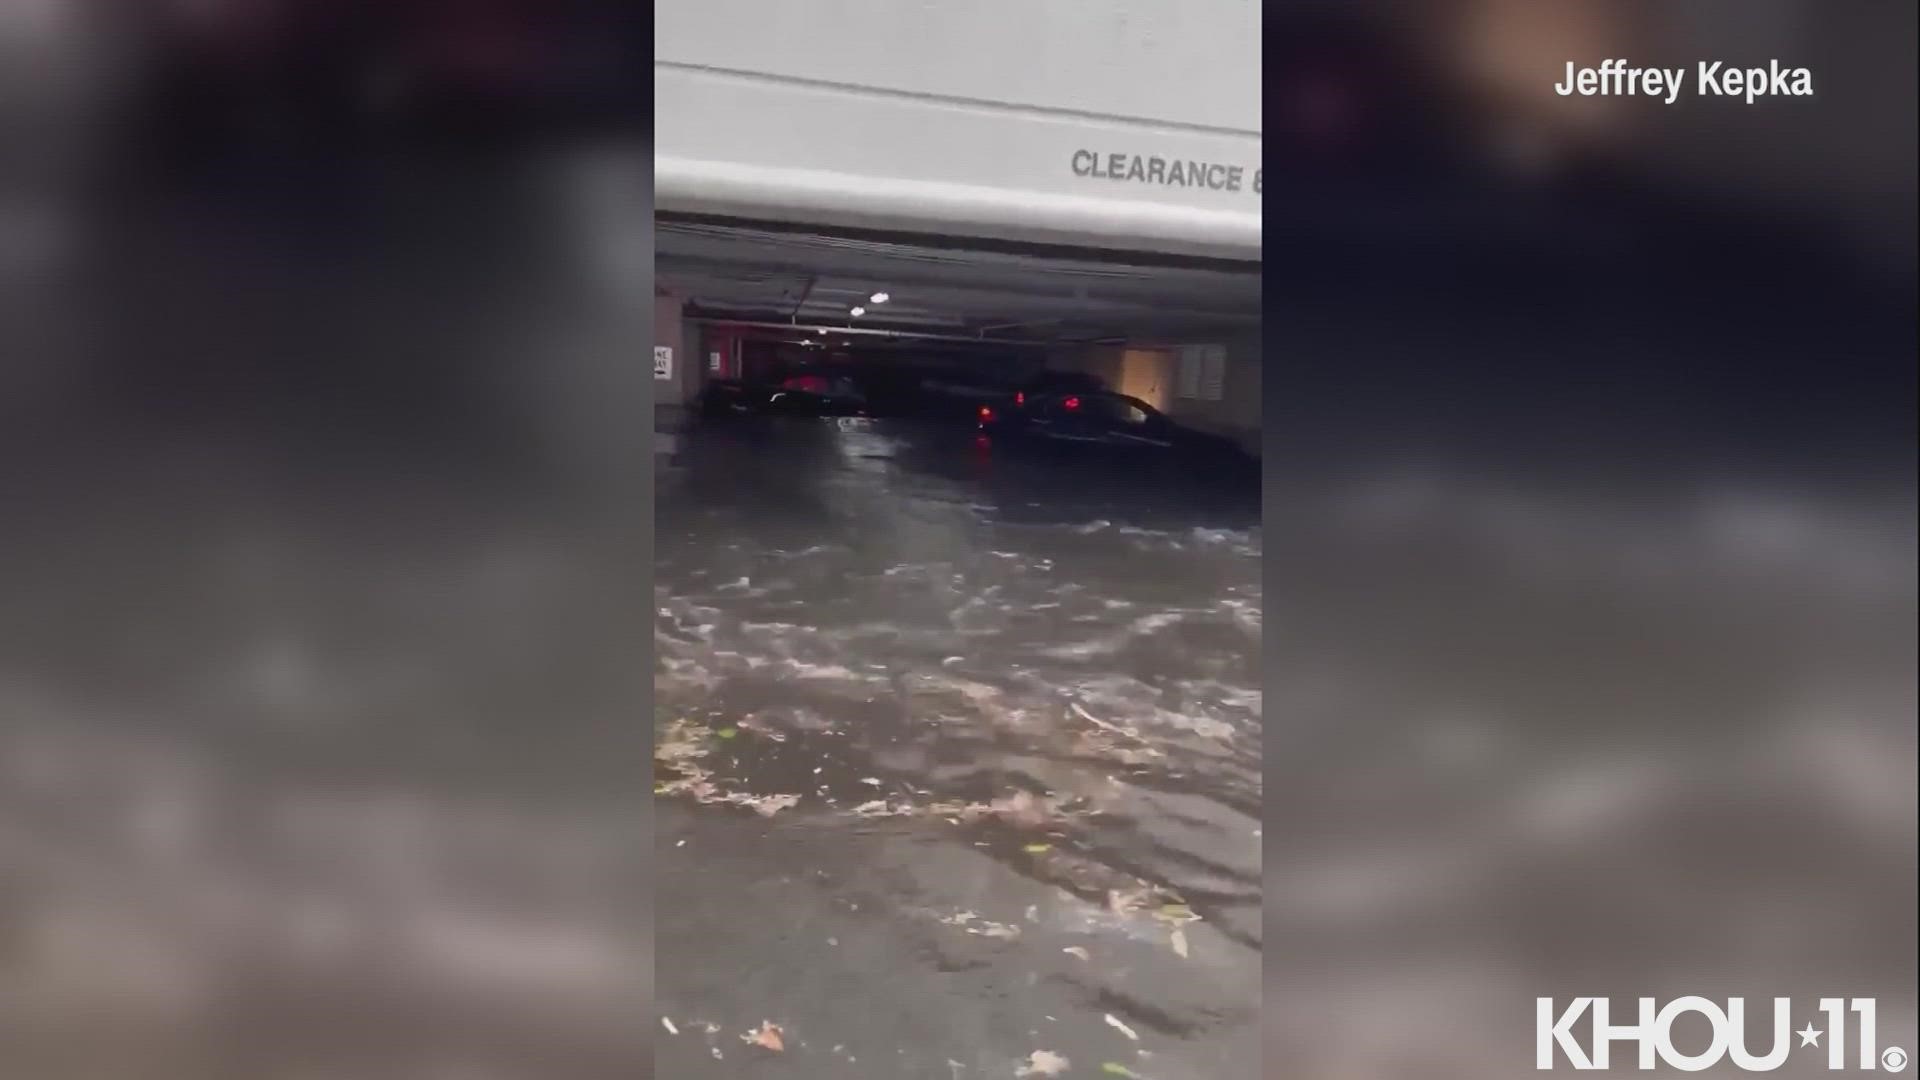 Jeffrey Kepka captured submerged cars in a flooded parking garage in Pelican Bay, Naples.